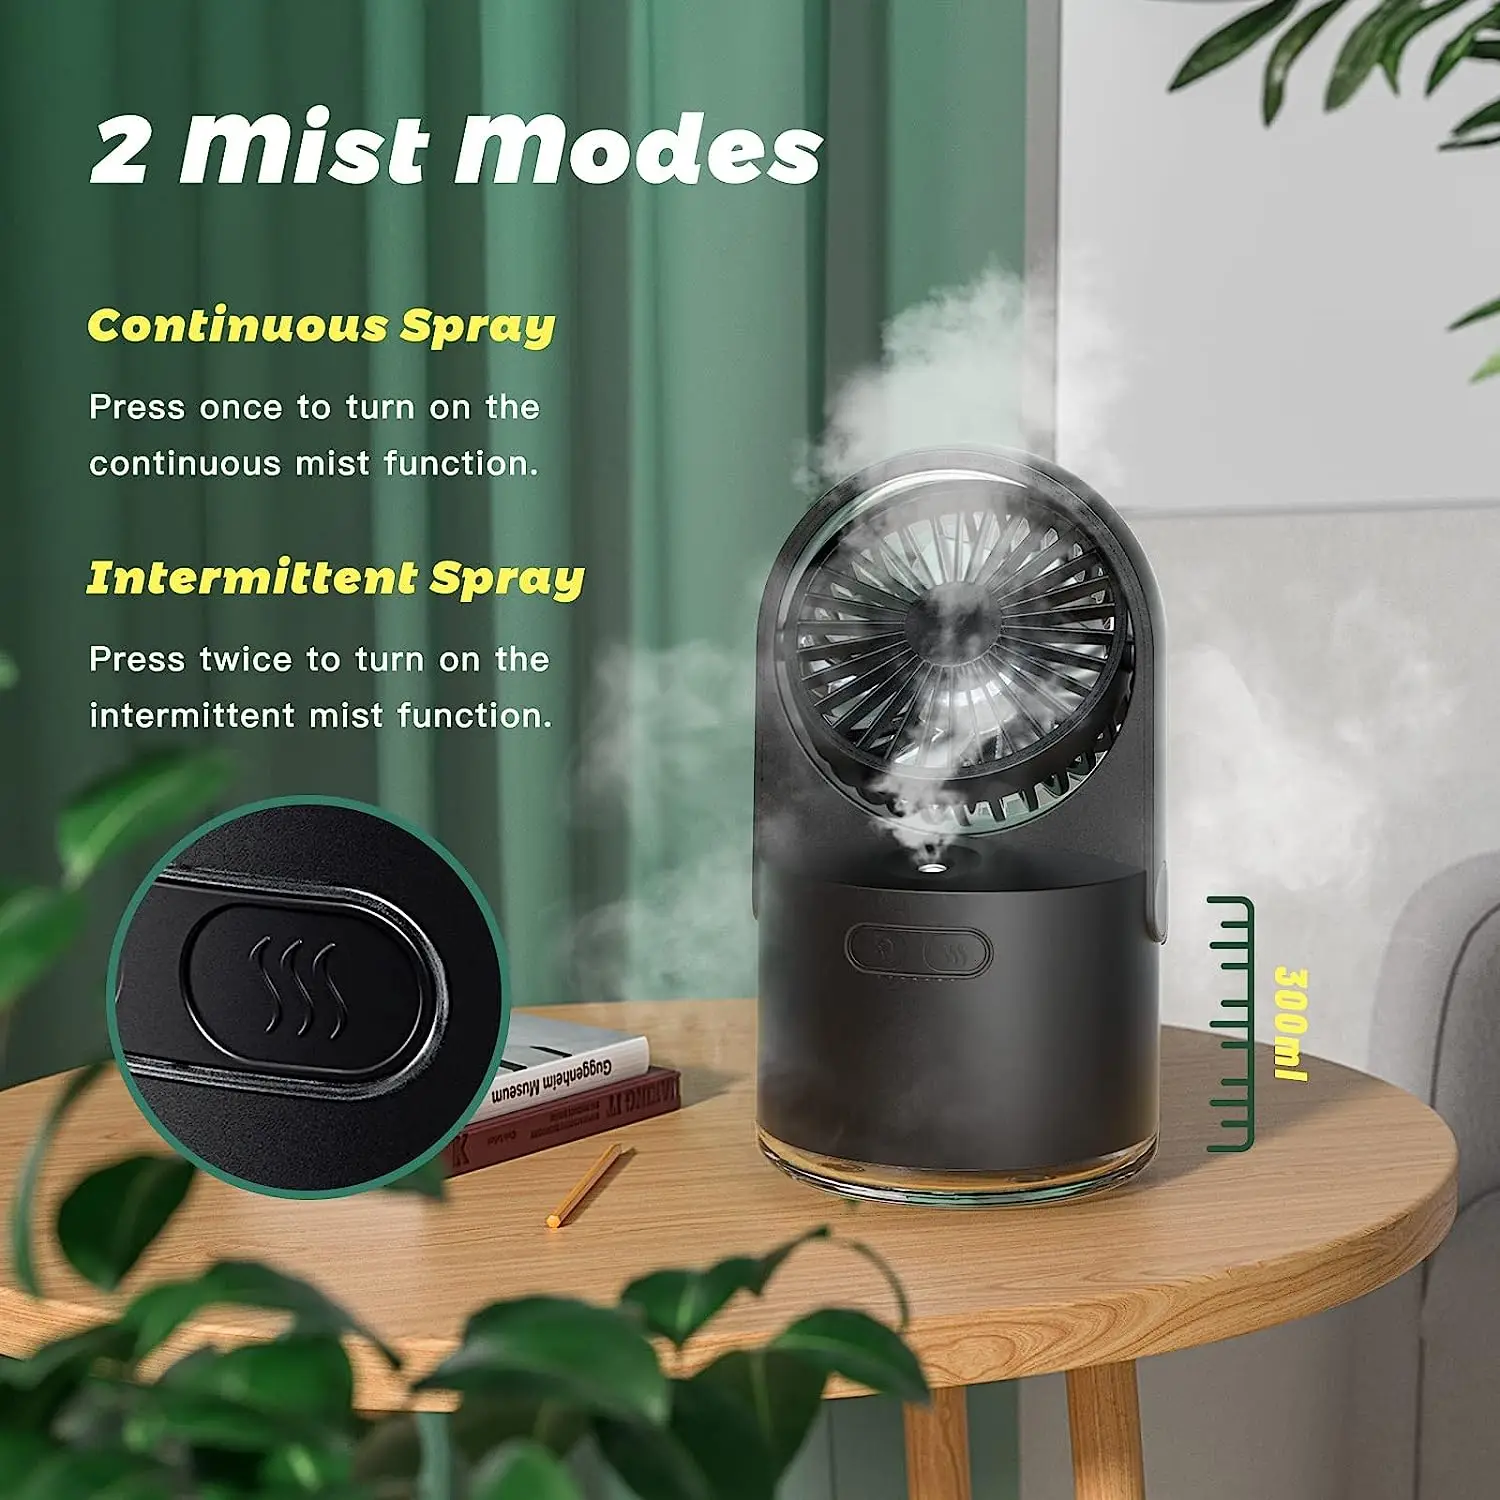 

Portable Desktop Cooler Fan Household Air Conditioner Humidifier Night Light USB Rechargeable 2000mAh Large Spray Mini Fans